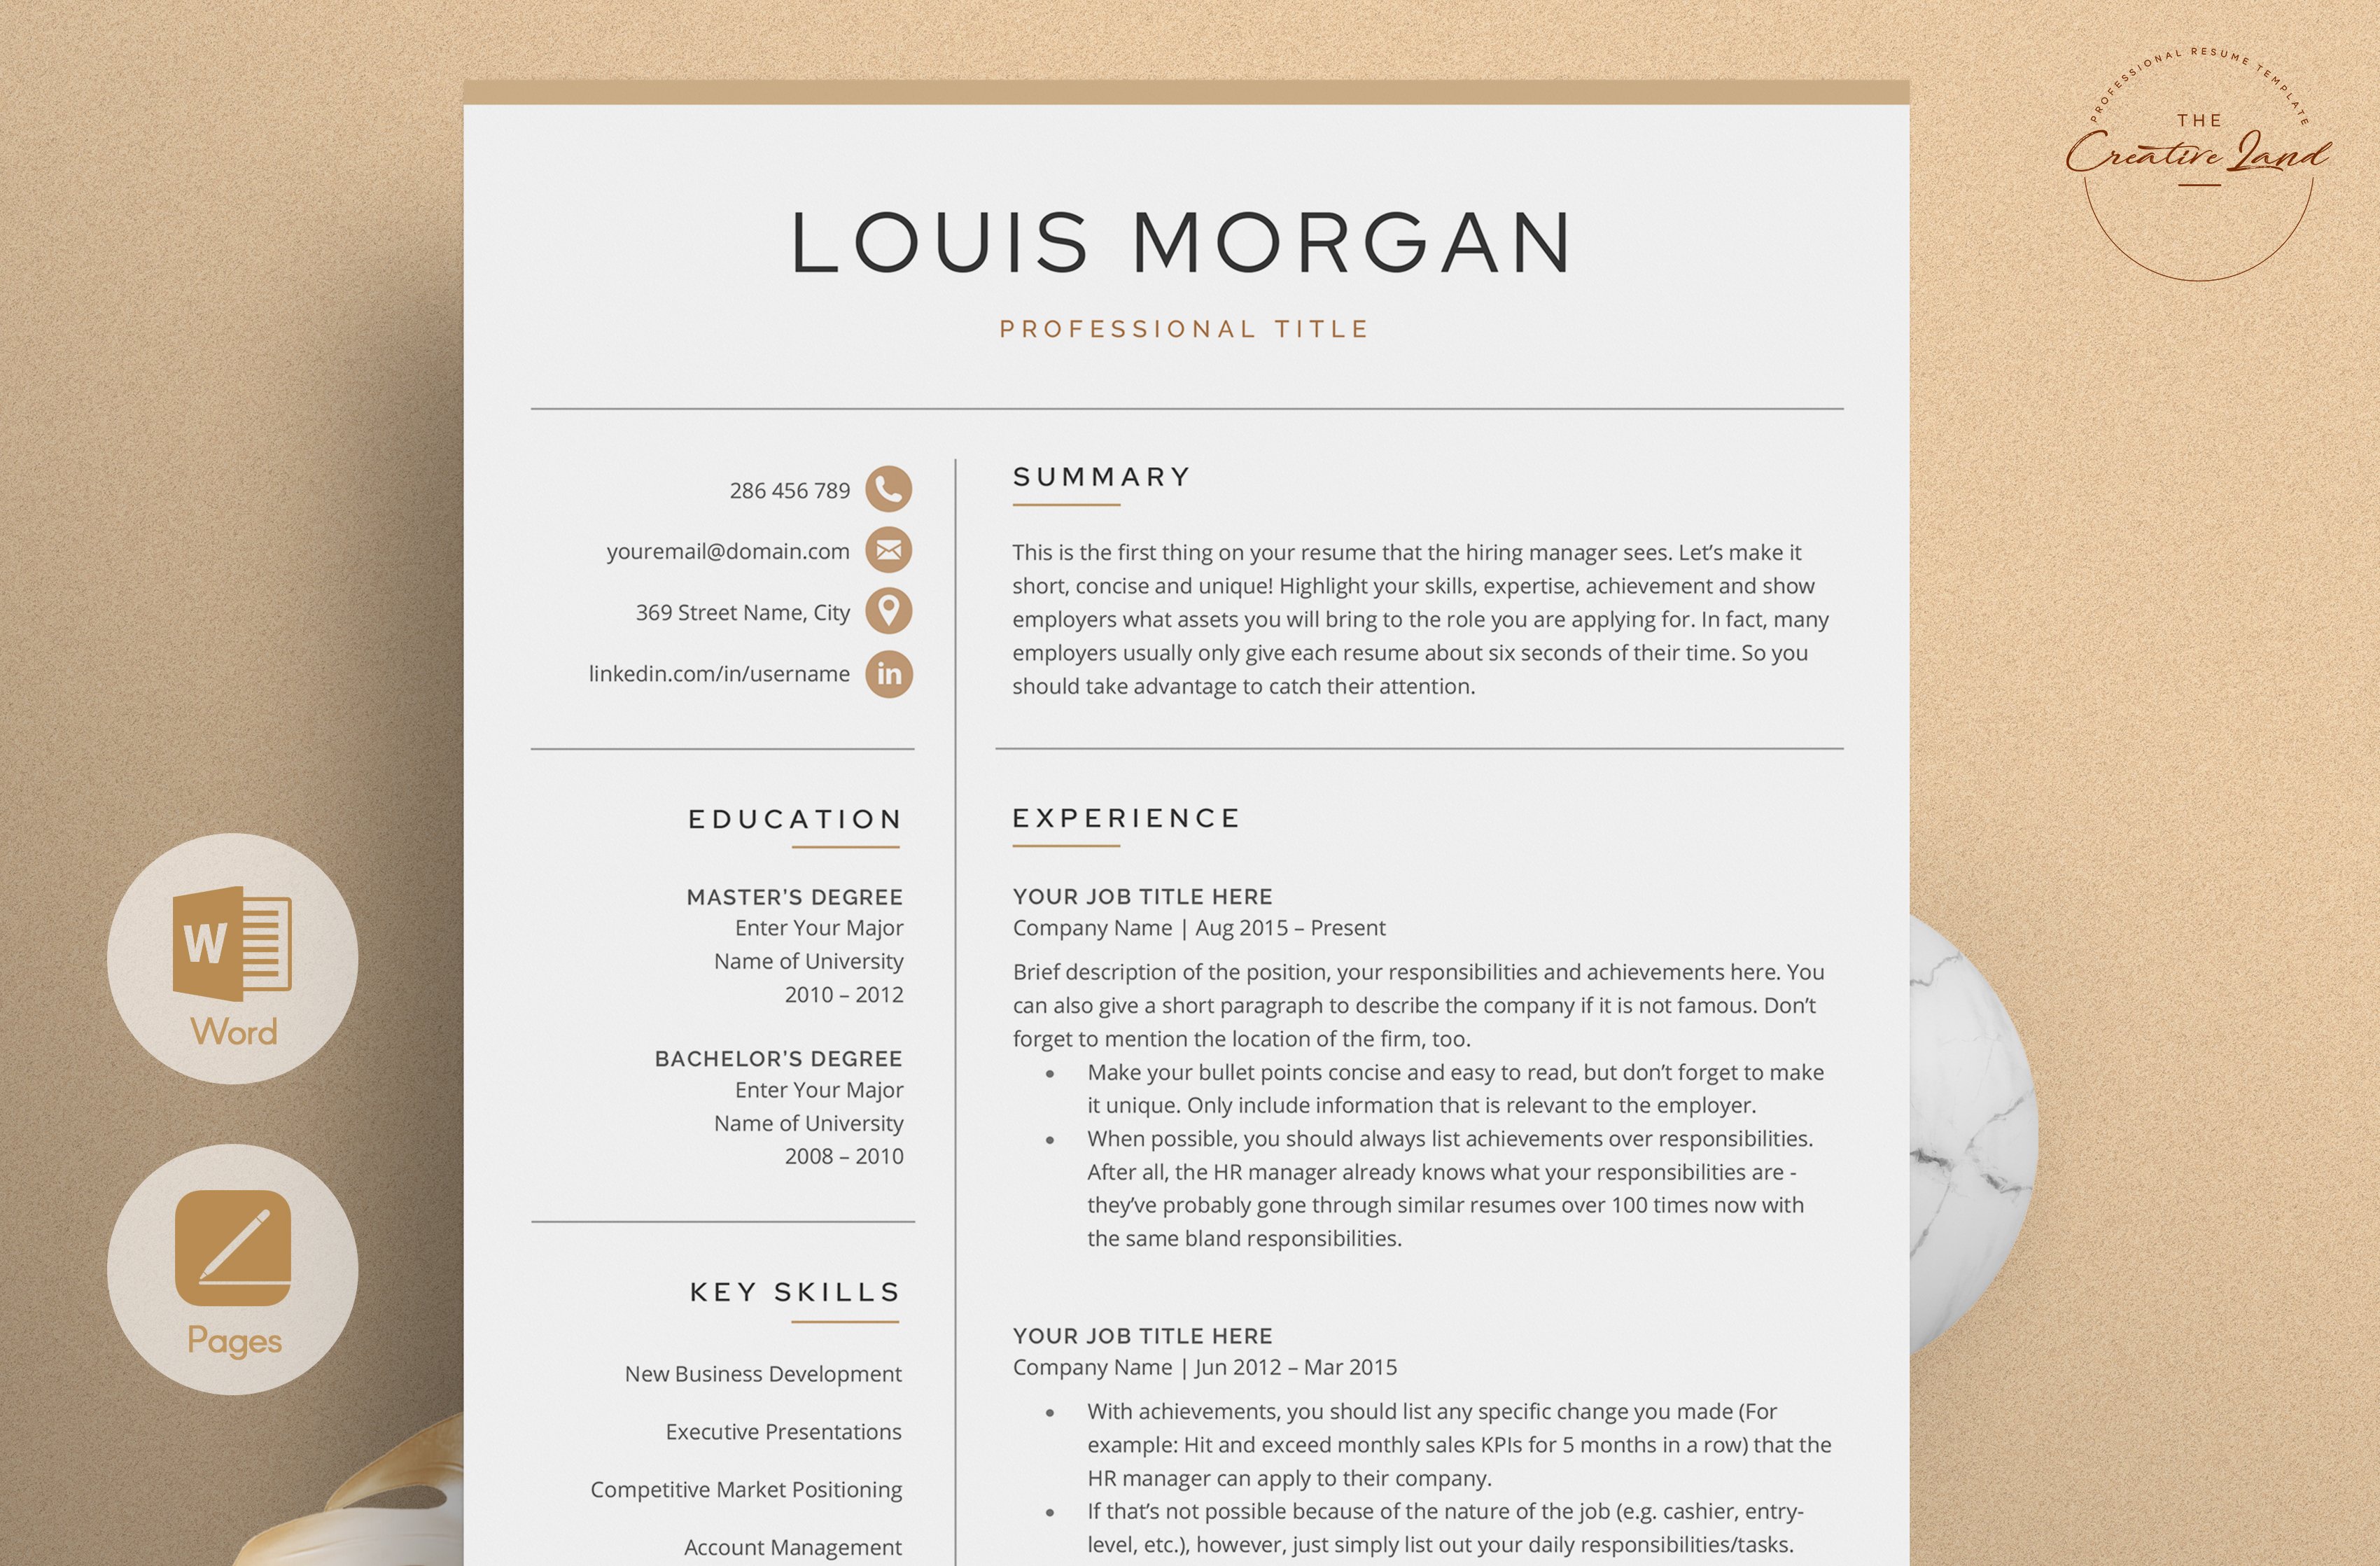 Resume/CV - The Louis cover image.